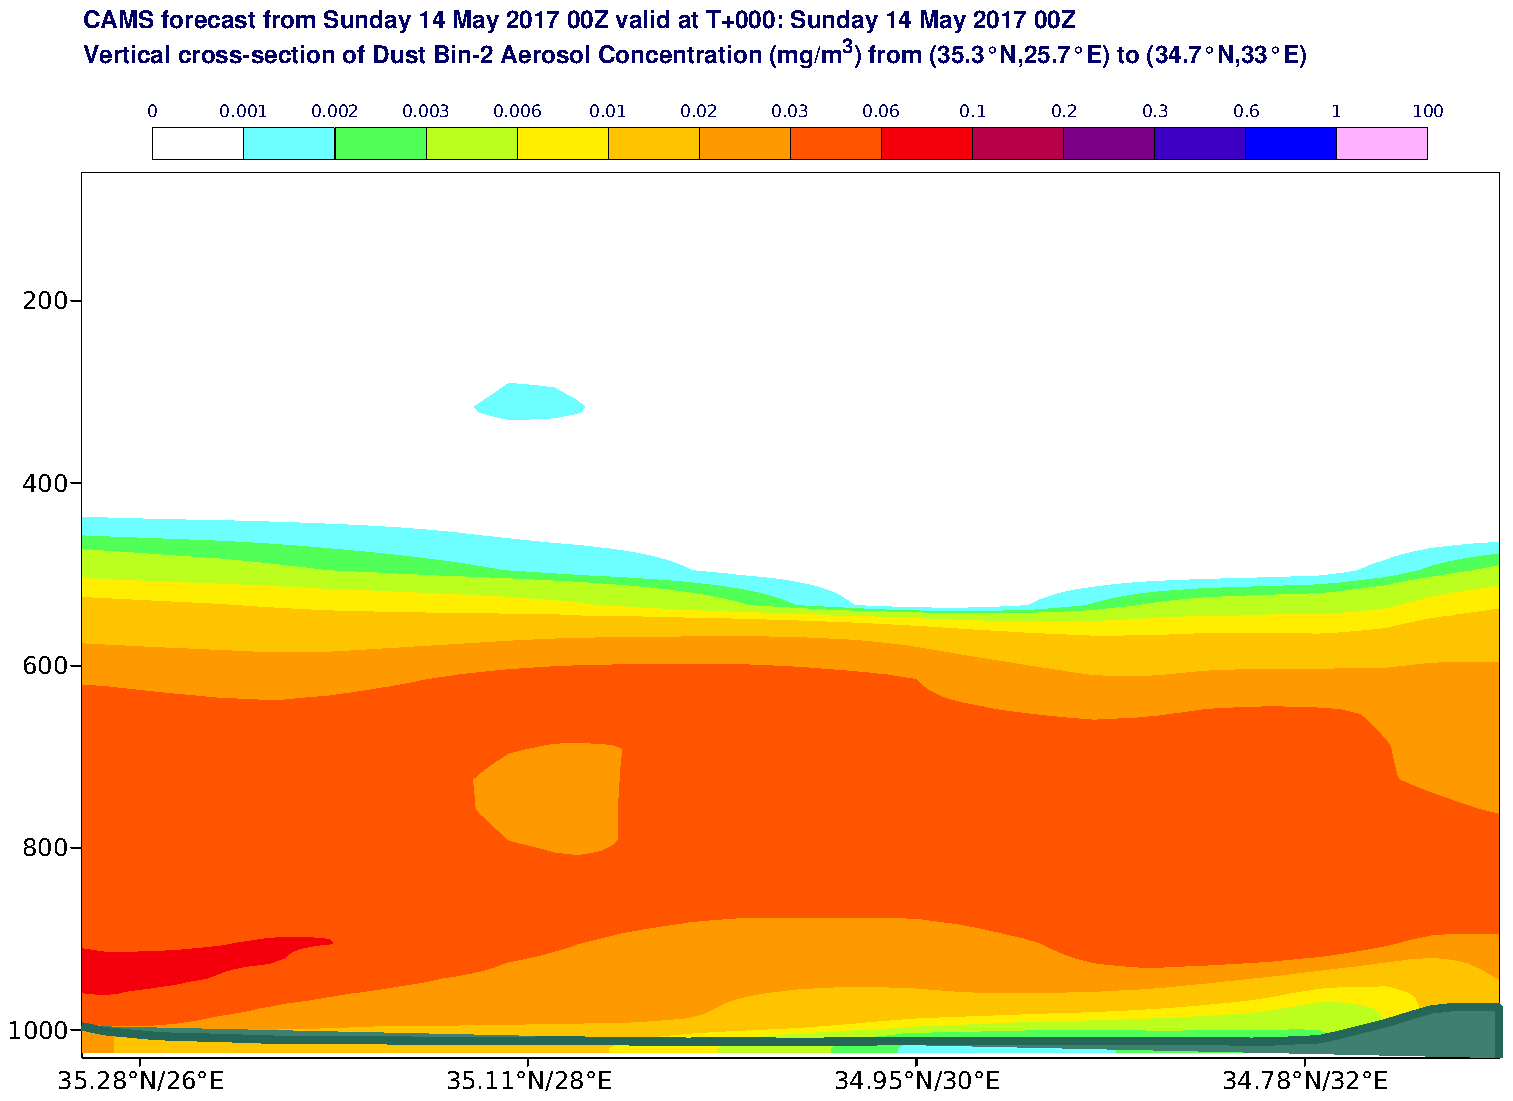 Vertical cross-section of Dust Bin-2 Aerosol Concentration (mg/m3) valid at T0 - 2017-05-14 00:00